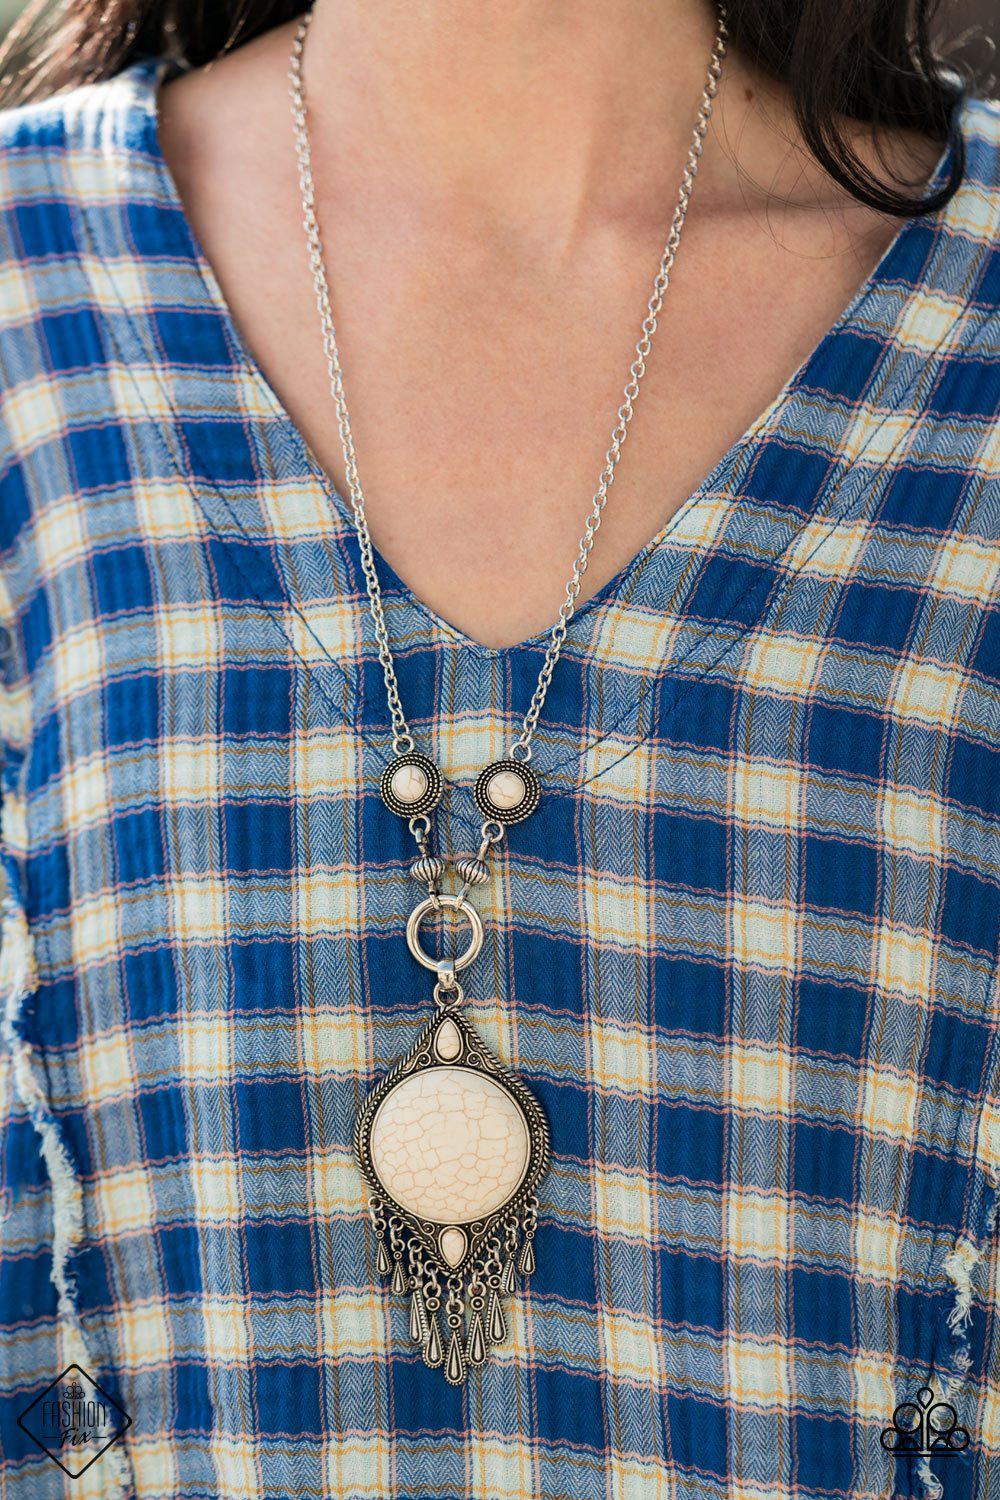 Majestic Mountaineer White Stone Necklace - Paparazzi Accessories - model -CarasShop.com - $5 Jewelry by Cara Jewels